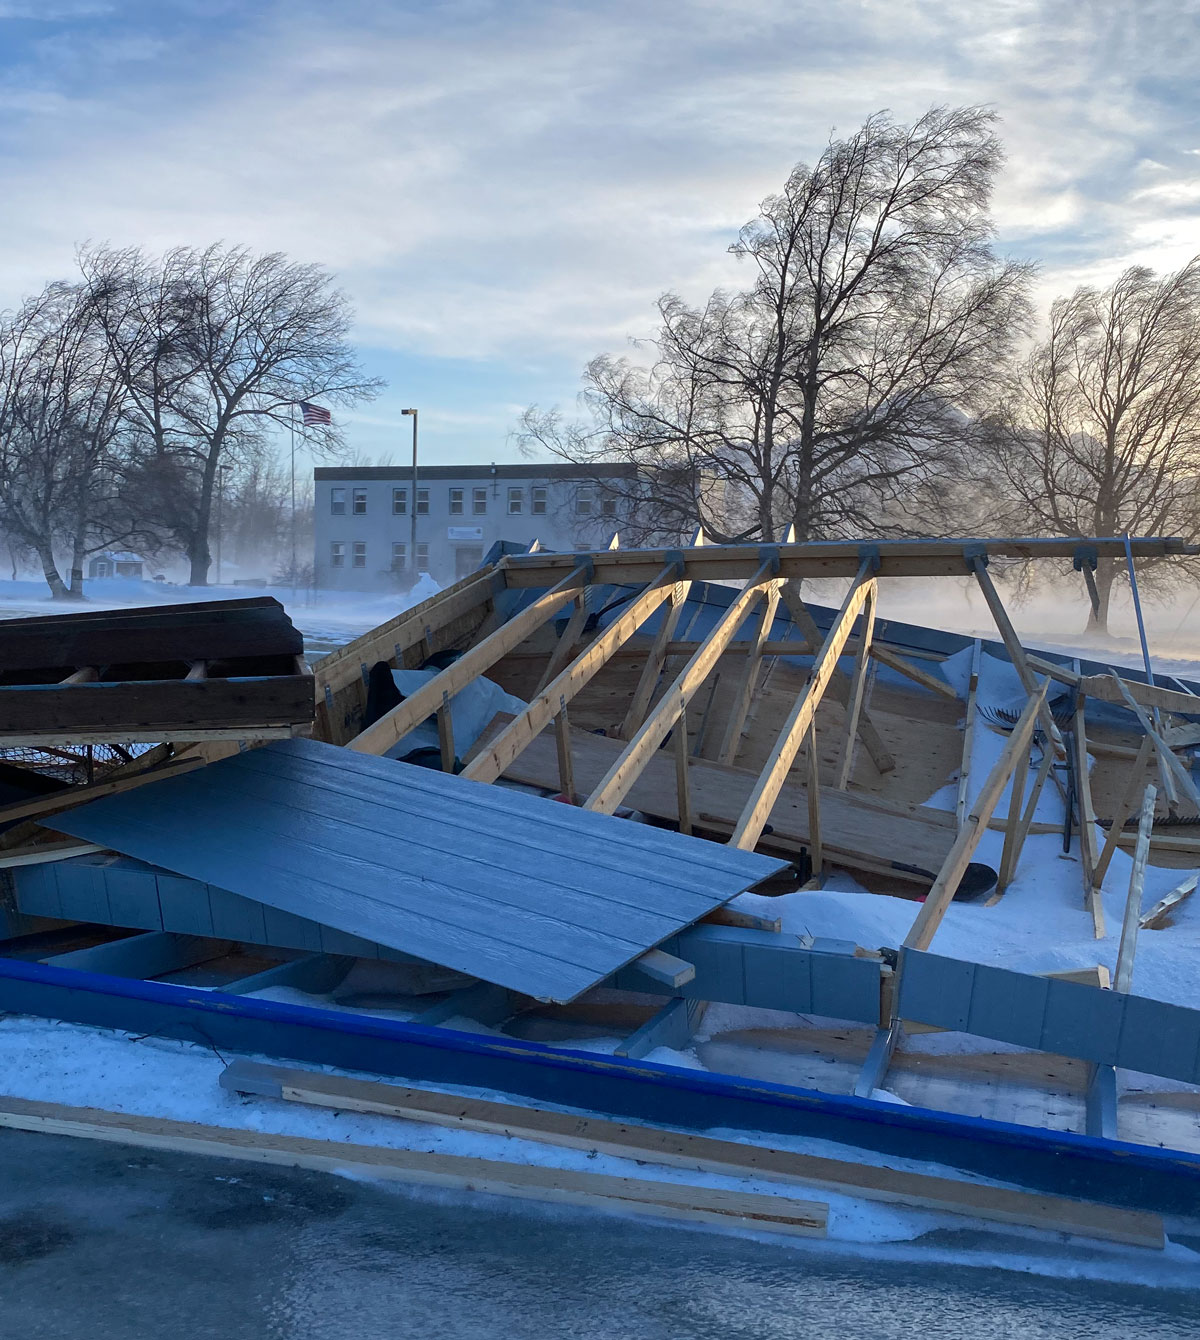 A storage shed on ball fields near the Matanuska-Susitna Borough building in Palmer was demolished by the January wind storm